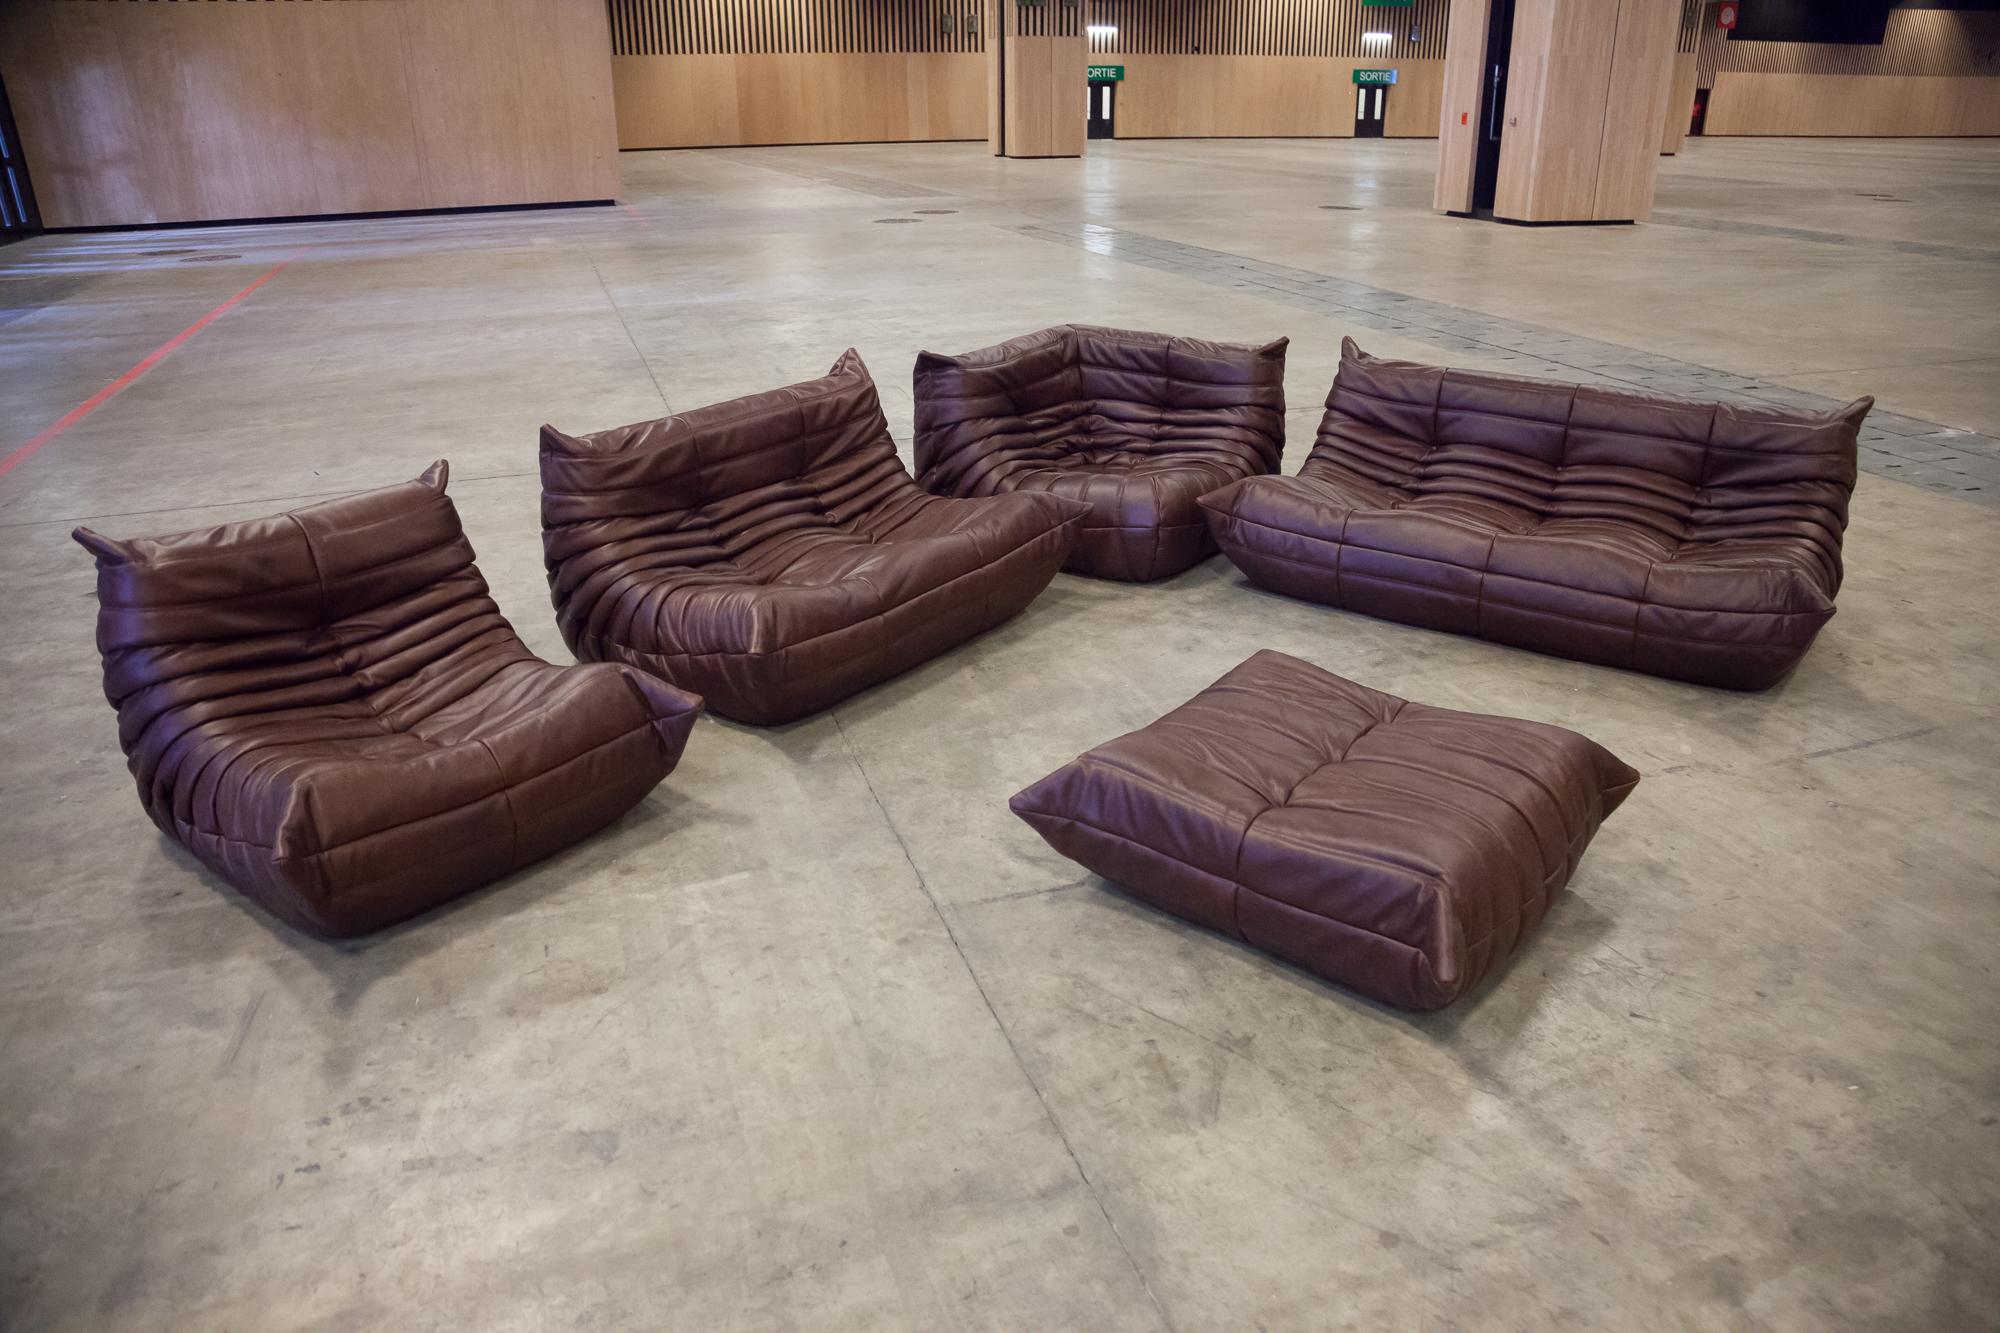 This Togo living room set was designed by Michel Ducaroy in 1973 and was manufactured by Ligne Roset in France. It has been reupholstered in new, genuine dark chocolate brown leather and is made up of the following pieces, each with the original